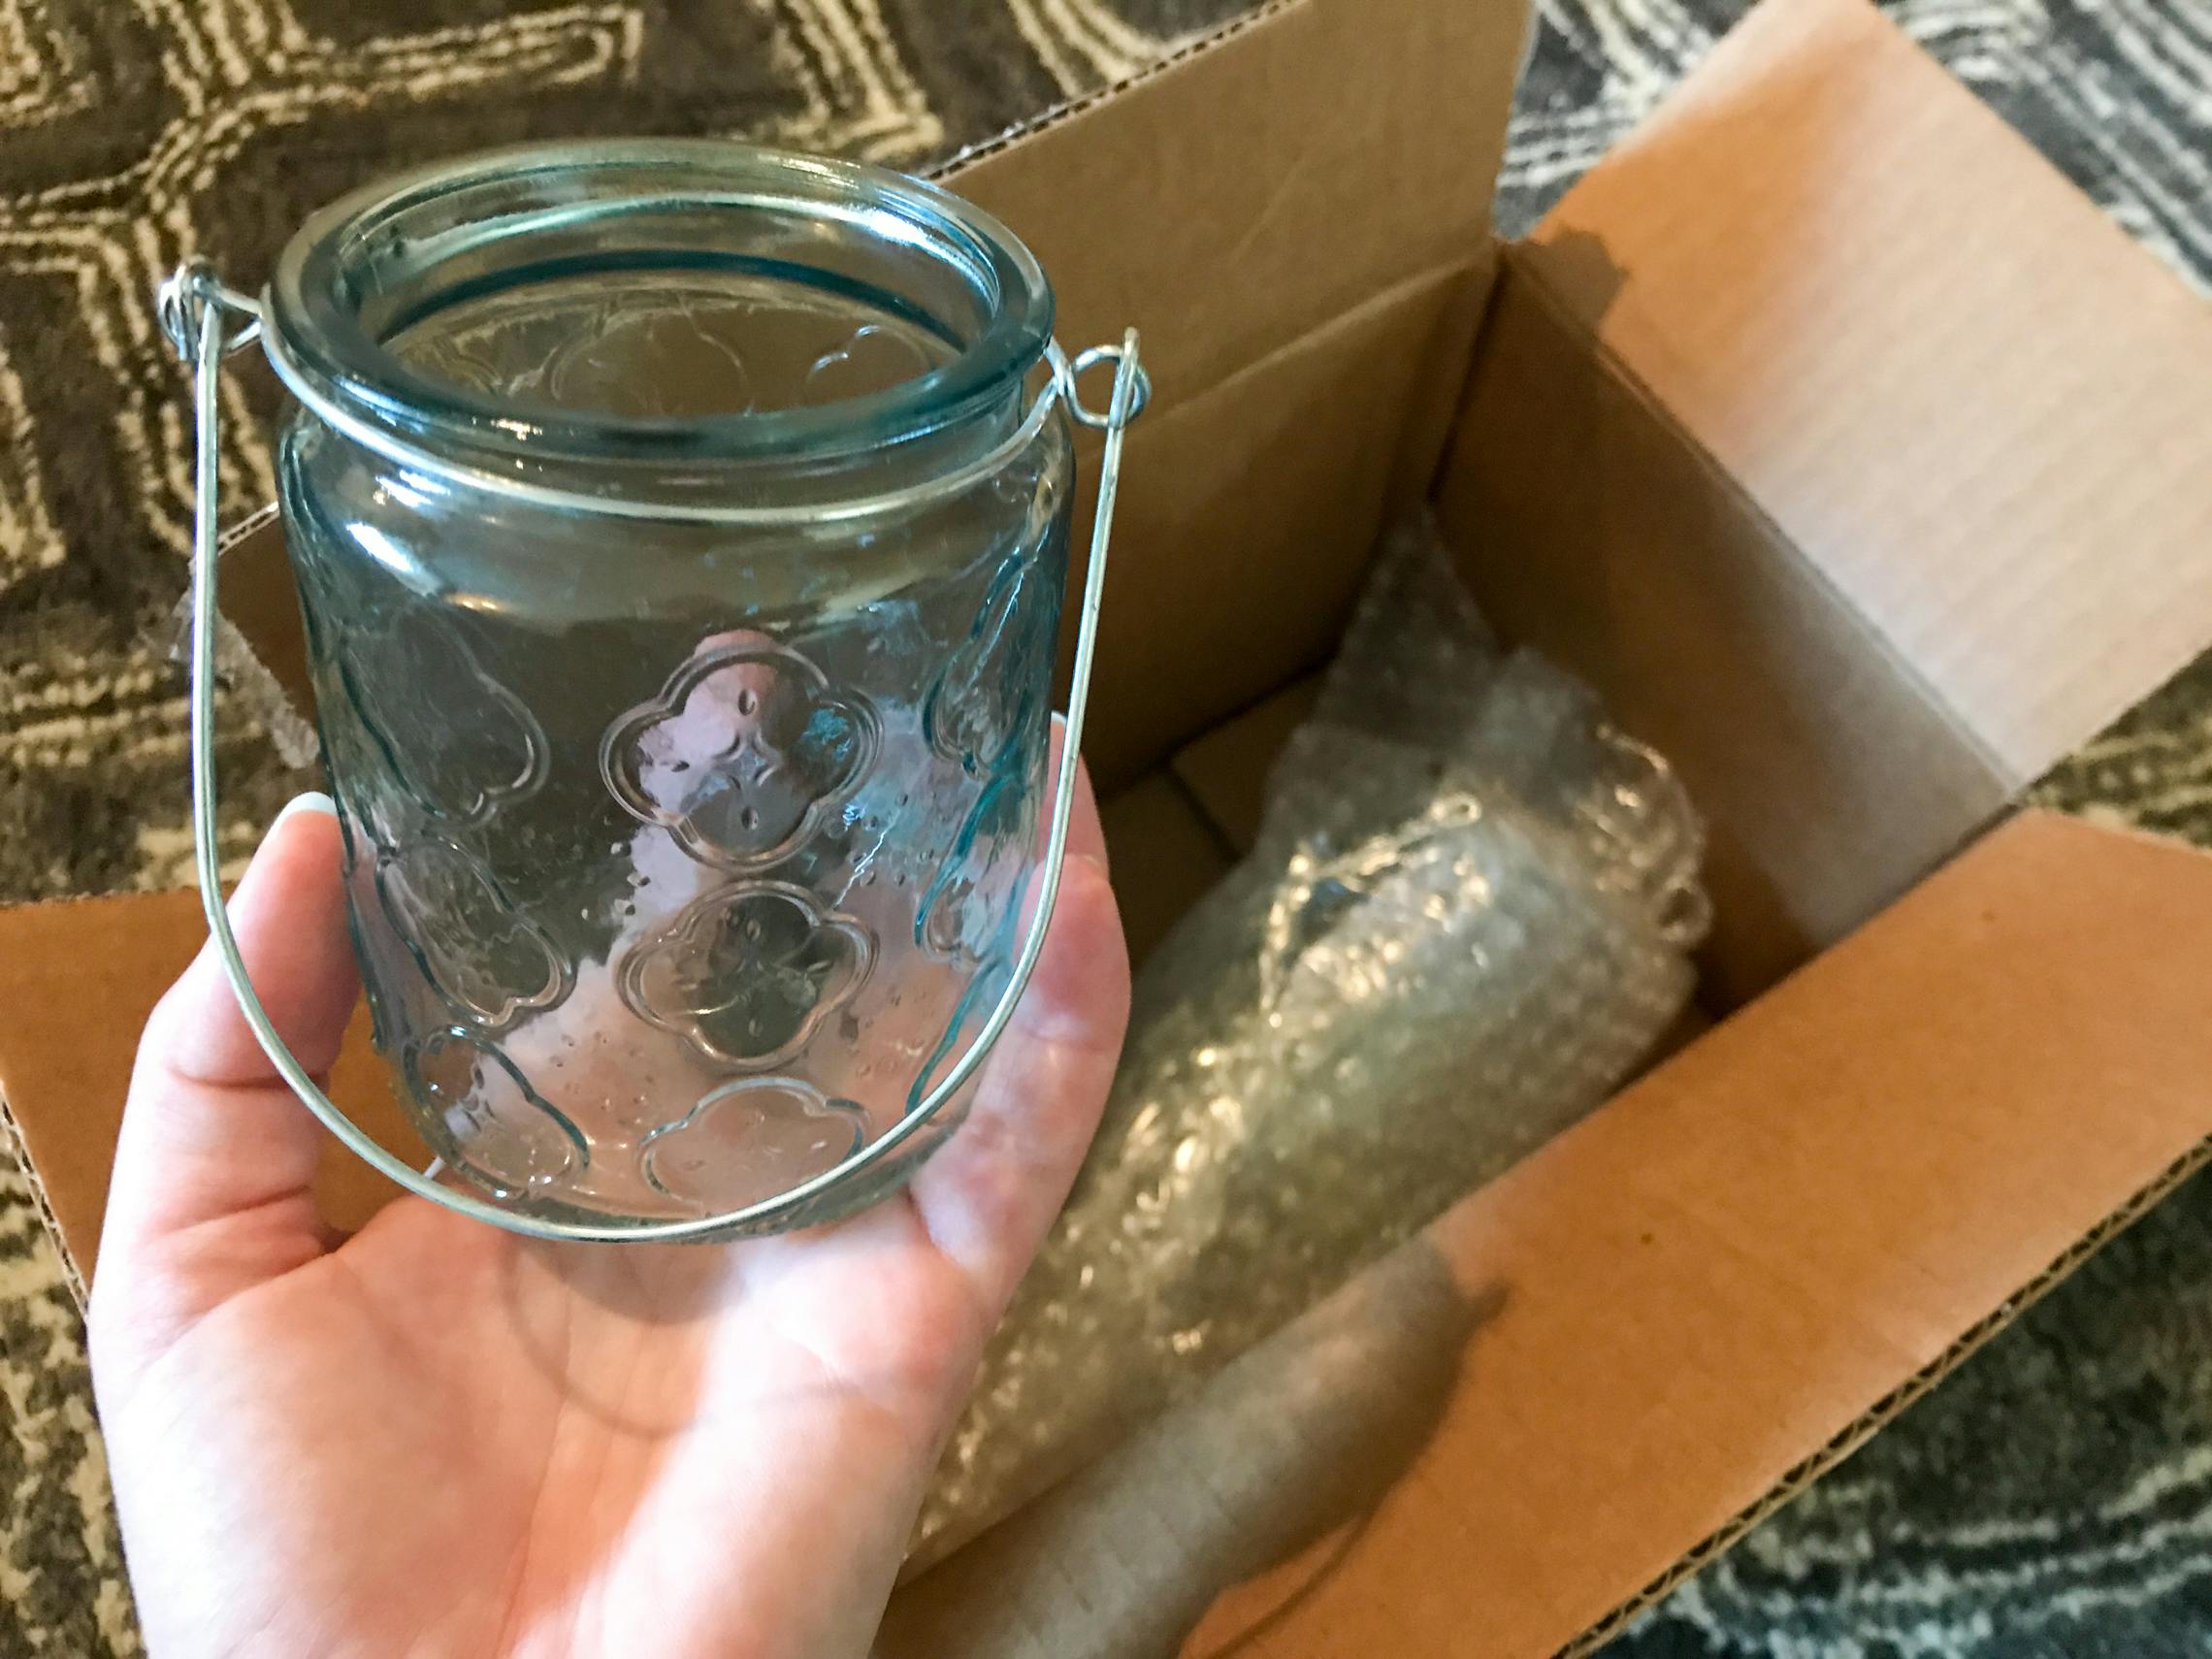 A candle holder from Hobby Lobby being pulled from delivery box